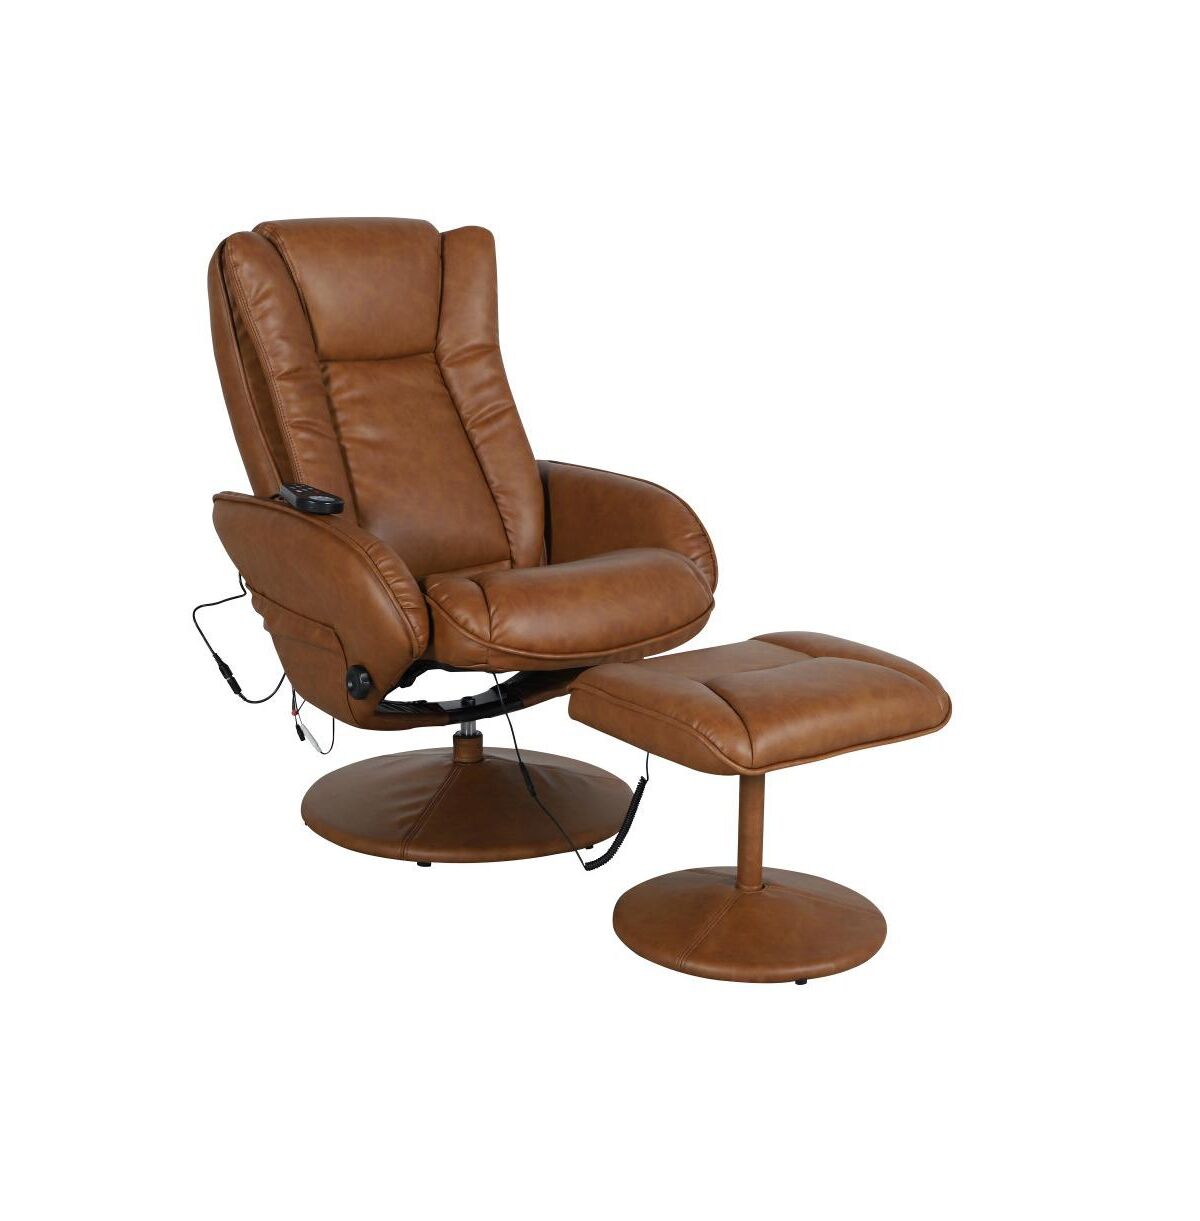 Emma+Oliver Massaging Multi-Position Plush Recliner With Side Pocket And Ottoman - Brown